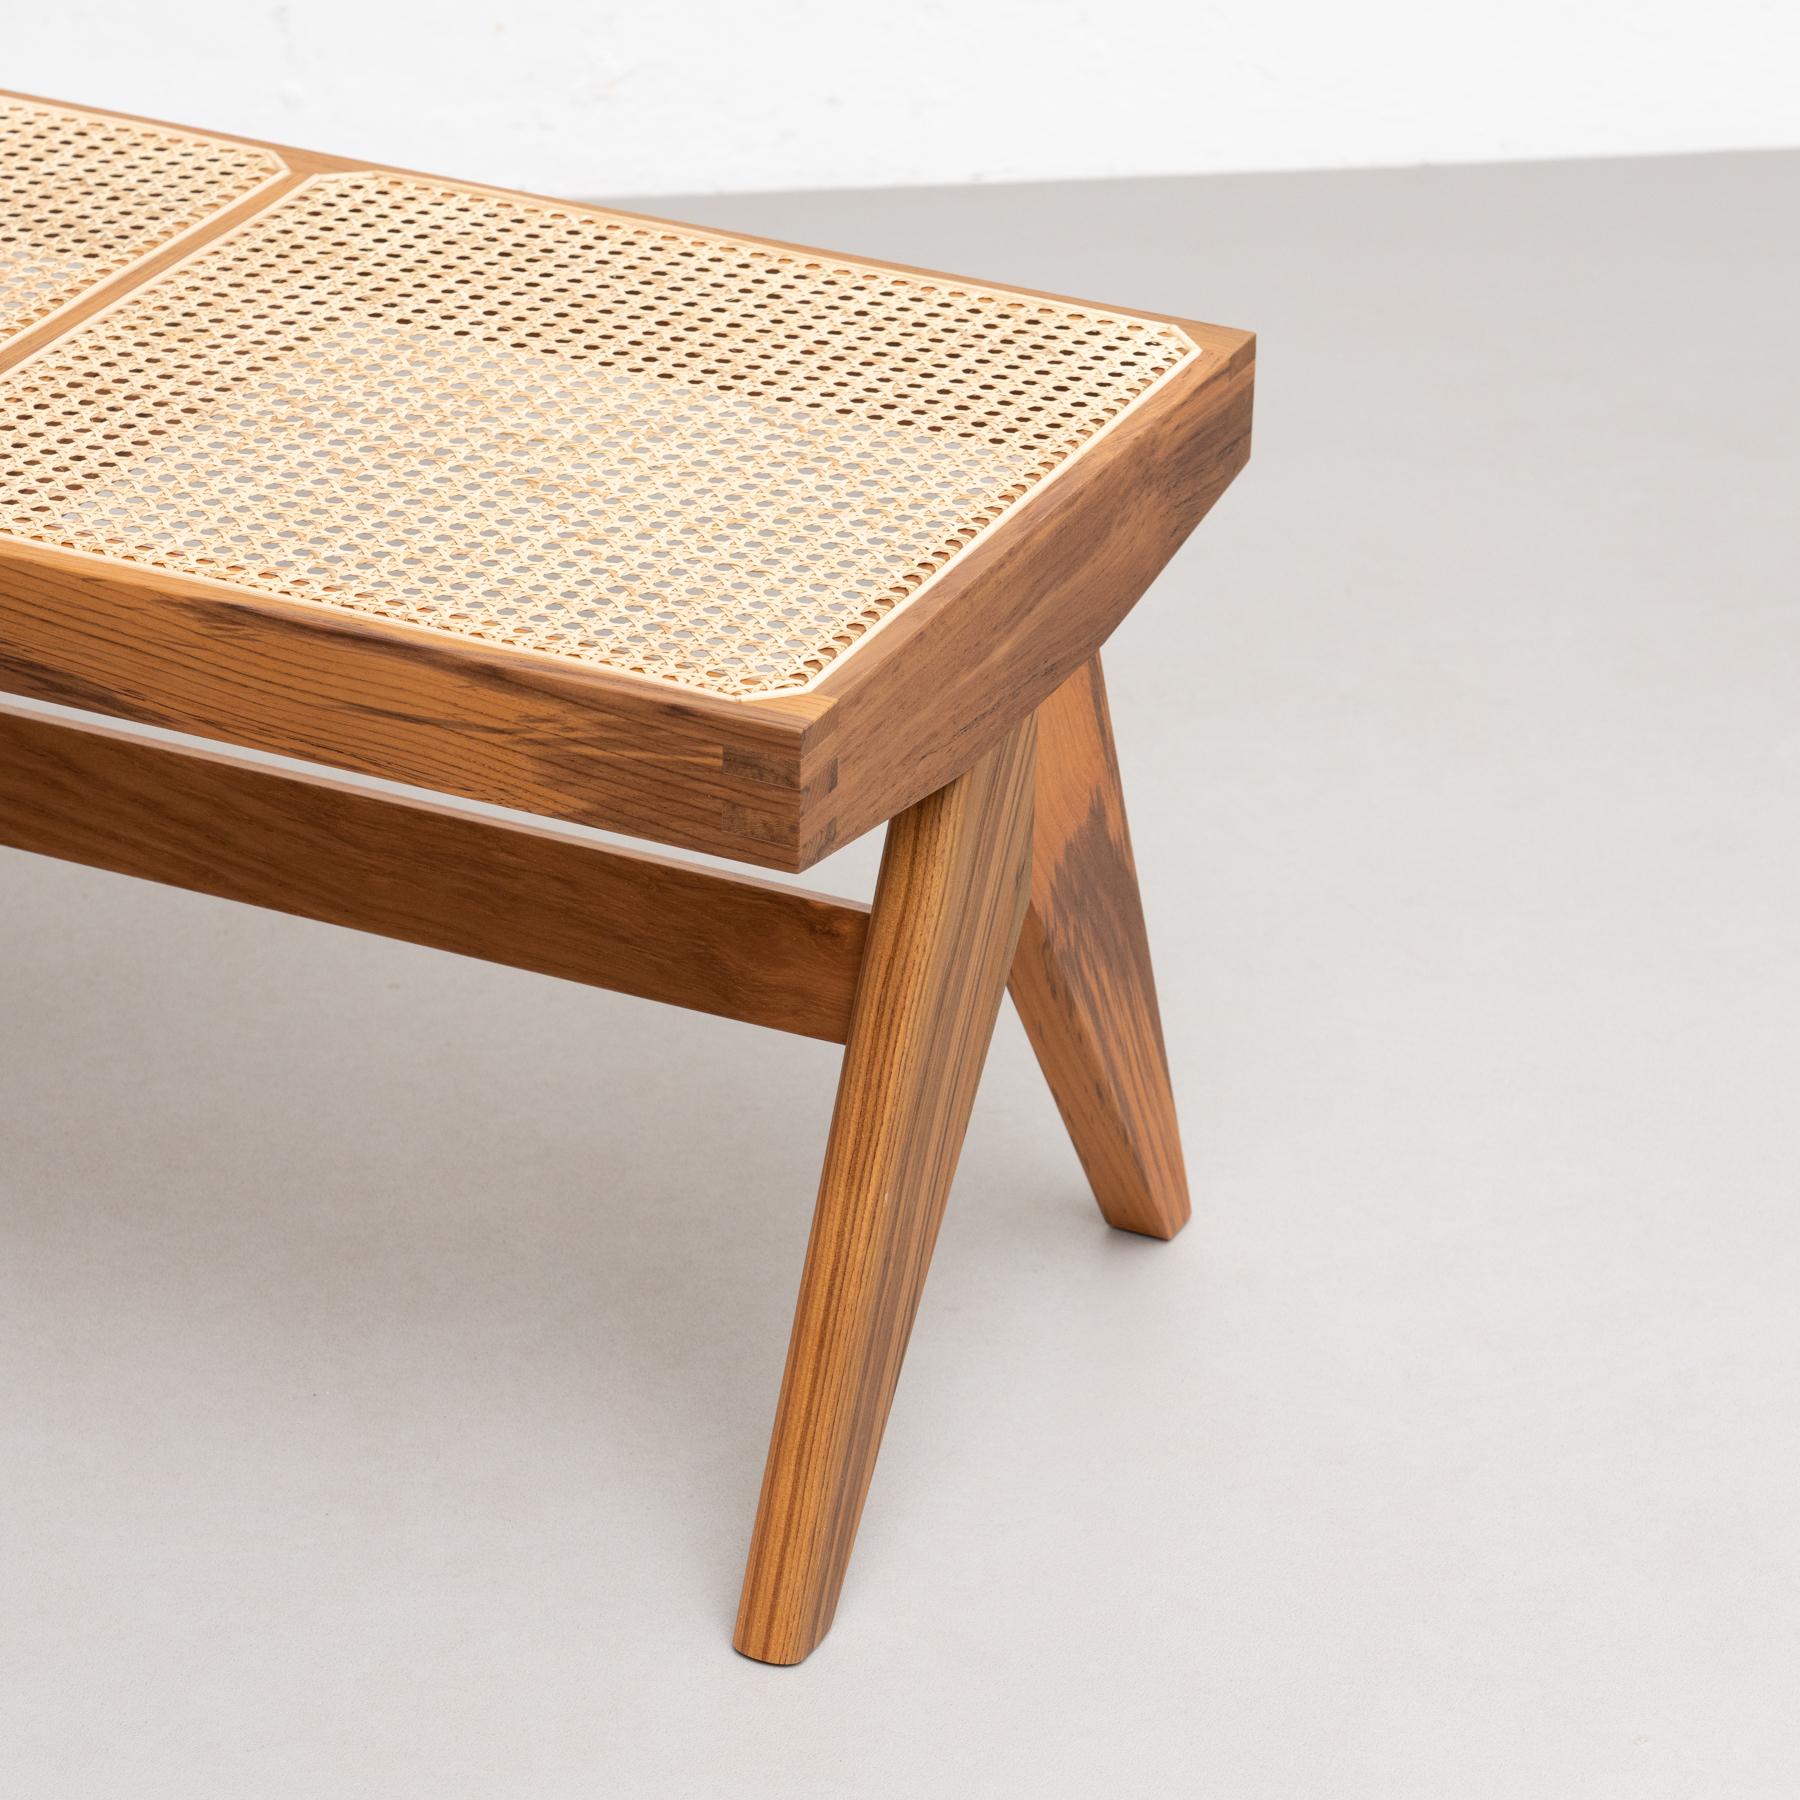 Pierre Jeanneret 057 Civil Bench, Wood and Woven Viennese Cane by Cassina 11